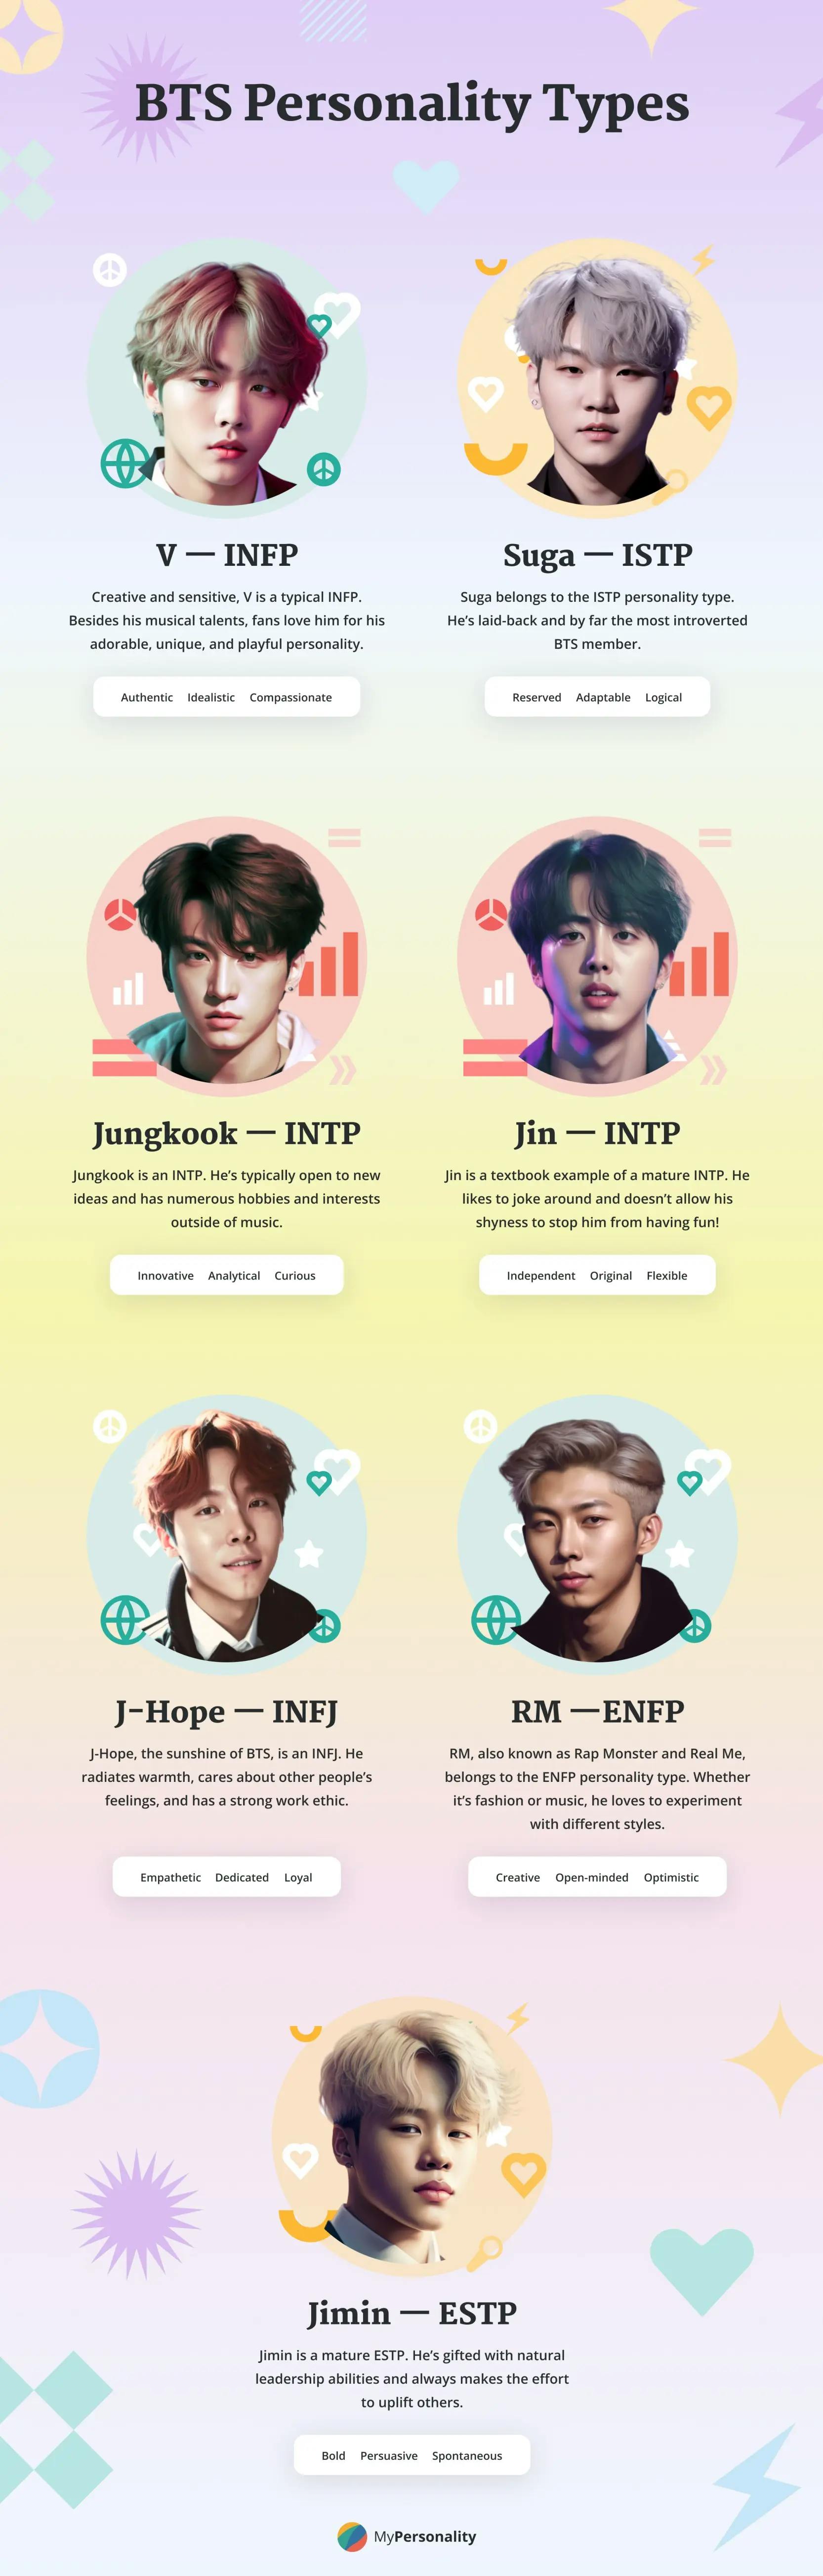 BTS Personality Types & Analysis